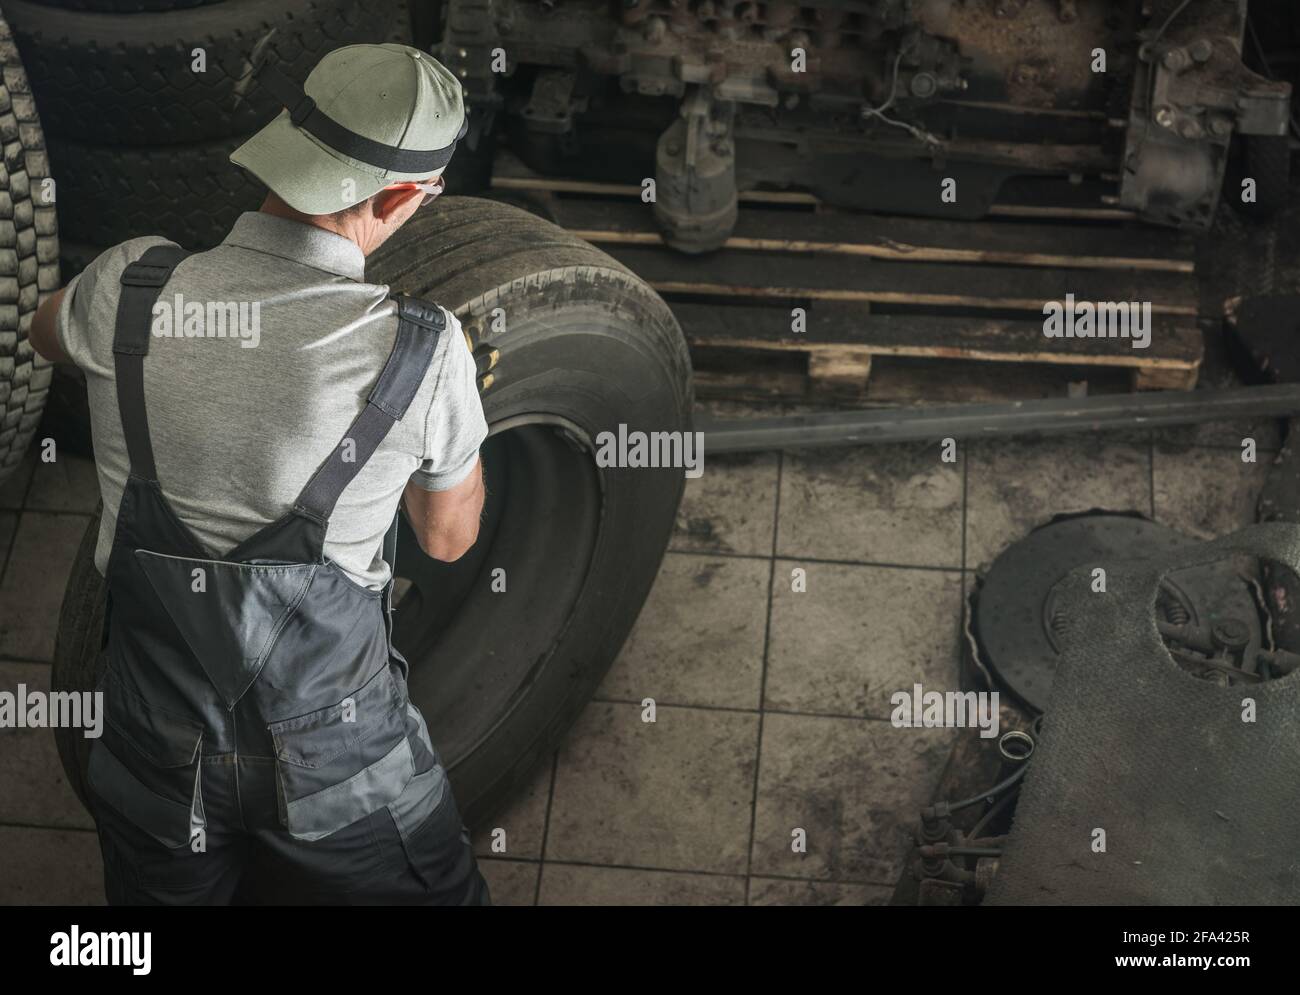 Caucasian Automotive Worker in His 40s Replacing Heavy Duty Truck Wheel For the New One. Semi Truck Service. Stock Photo